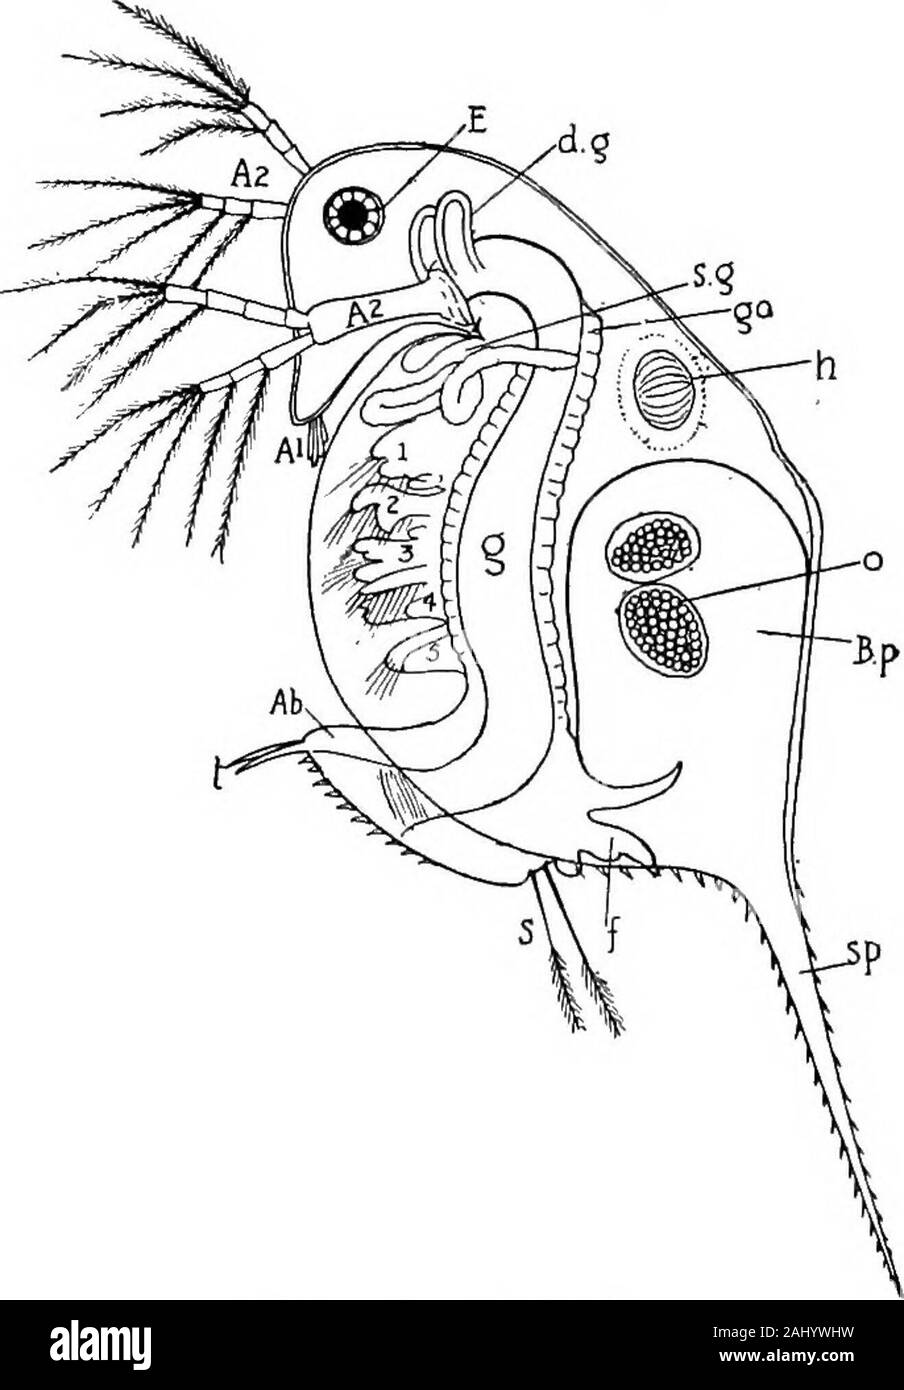 Outlines of zoology . .—Dorsal surface oiAptiscancriformis. ?— From BronnsThierreich. In the anterior region are the two com-pound eyes, and behind them thesimple unpaired eye. The whip-likeoutgrowths of the first thoracic ap-pendage project laterally. f- Antenna. Pre-oral. V Second antenna. (This is sometimes absent, andapparently always in certain species.) 3- Mandible. Oral. - A- Maxilla. l5- Maxillipede. 300 PHYLUM ARTHROPODA. f6. First thoracic foot (leg-like).Thoracic J 7-16. Other ten thoracic feet (swimmers). (Pregenital). j The i6th in the female carries an egg-sac or brood- t chamber Stock Photo